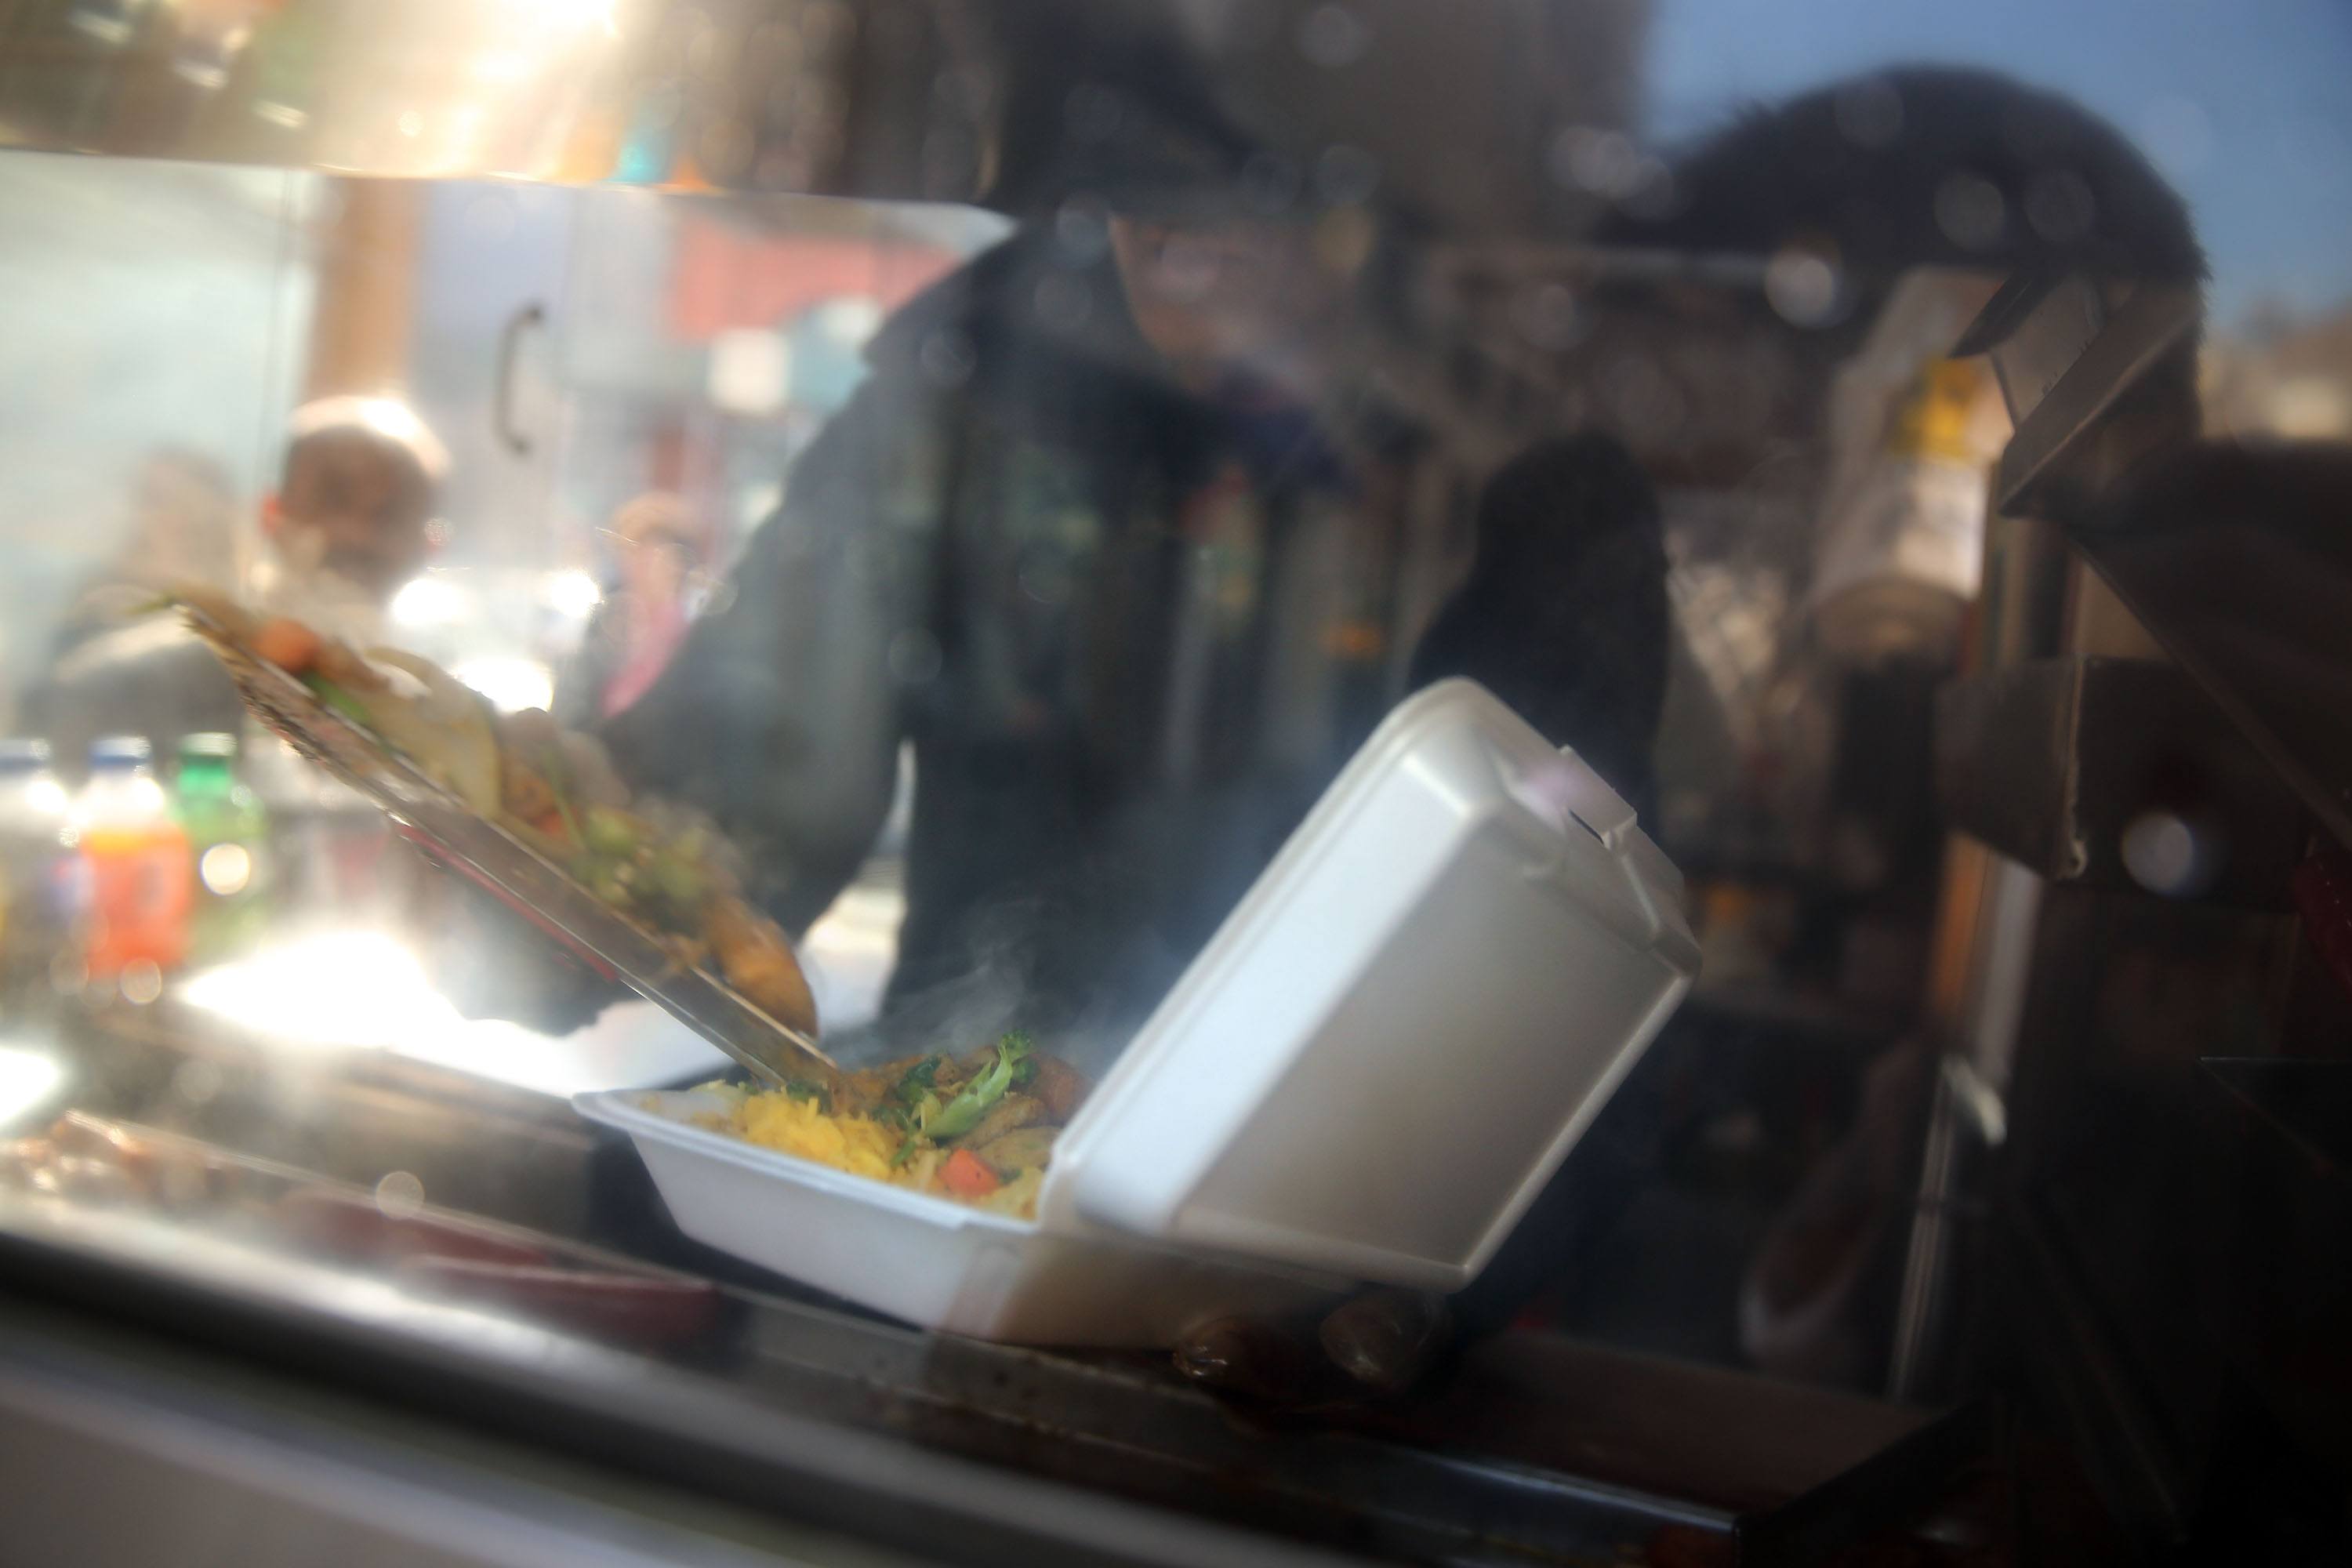 A food cart worker fills a styrofoam take-out container with food